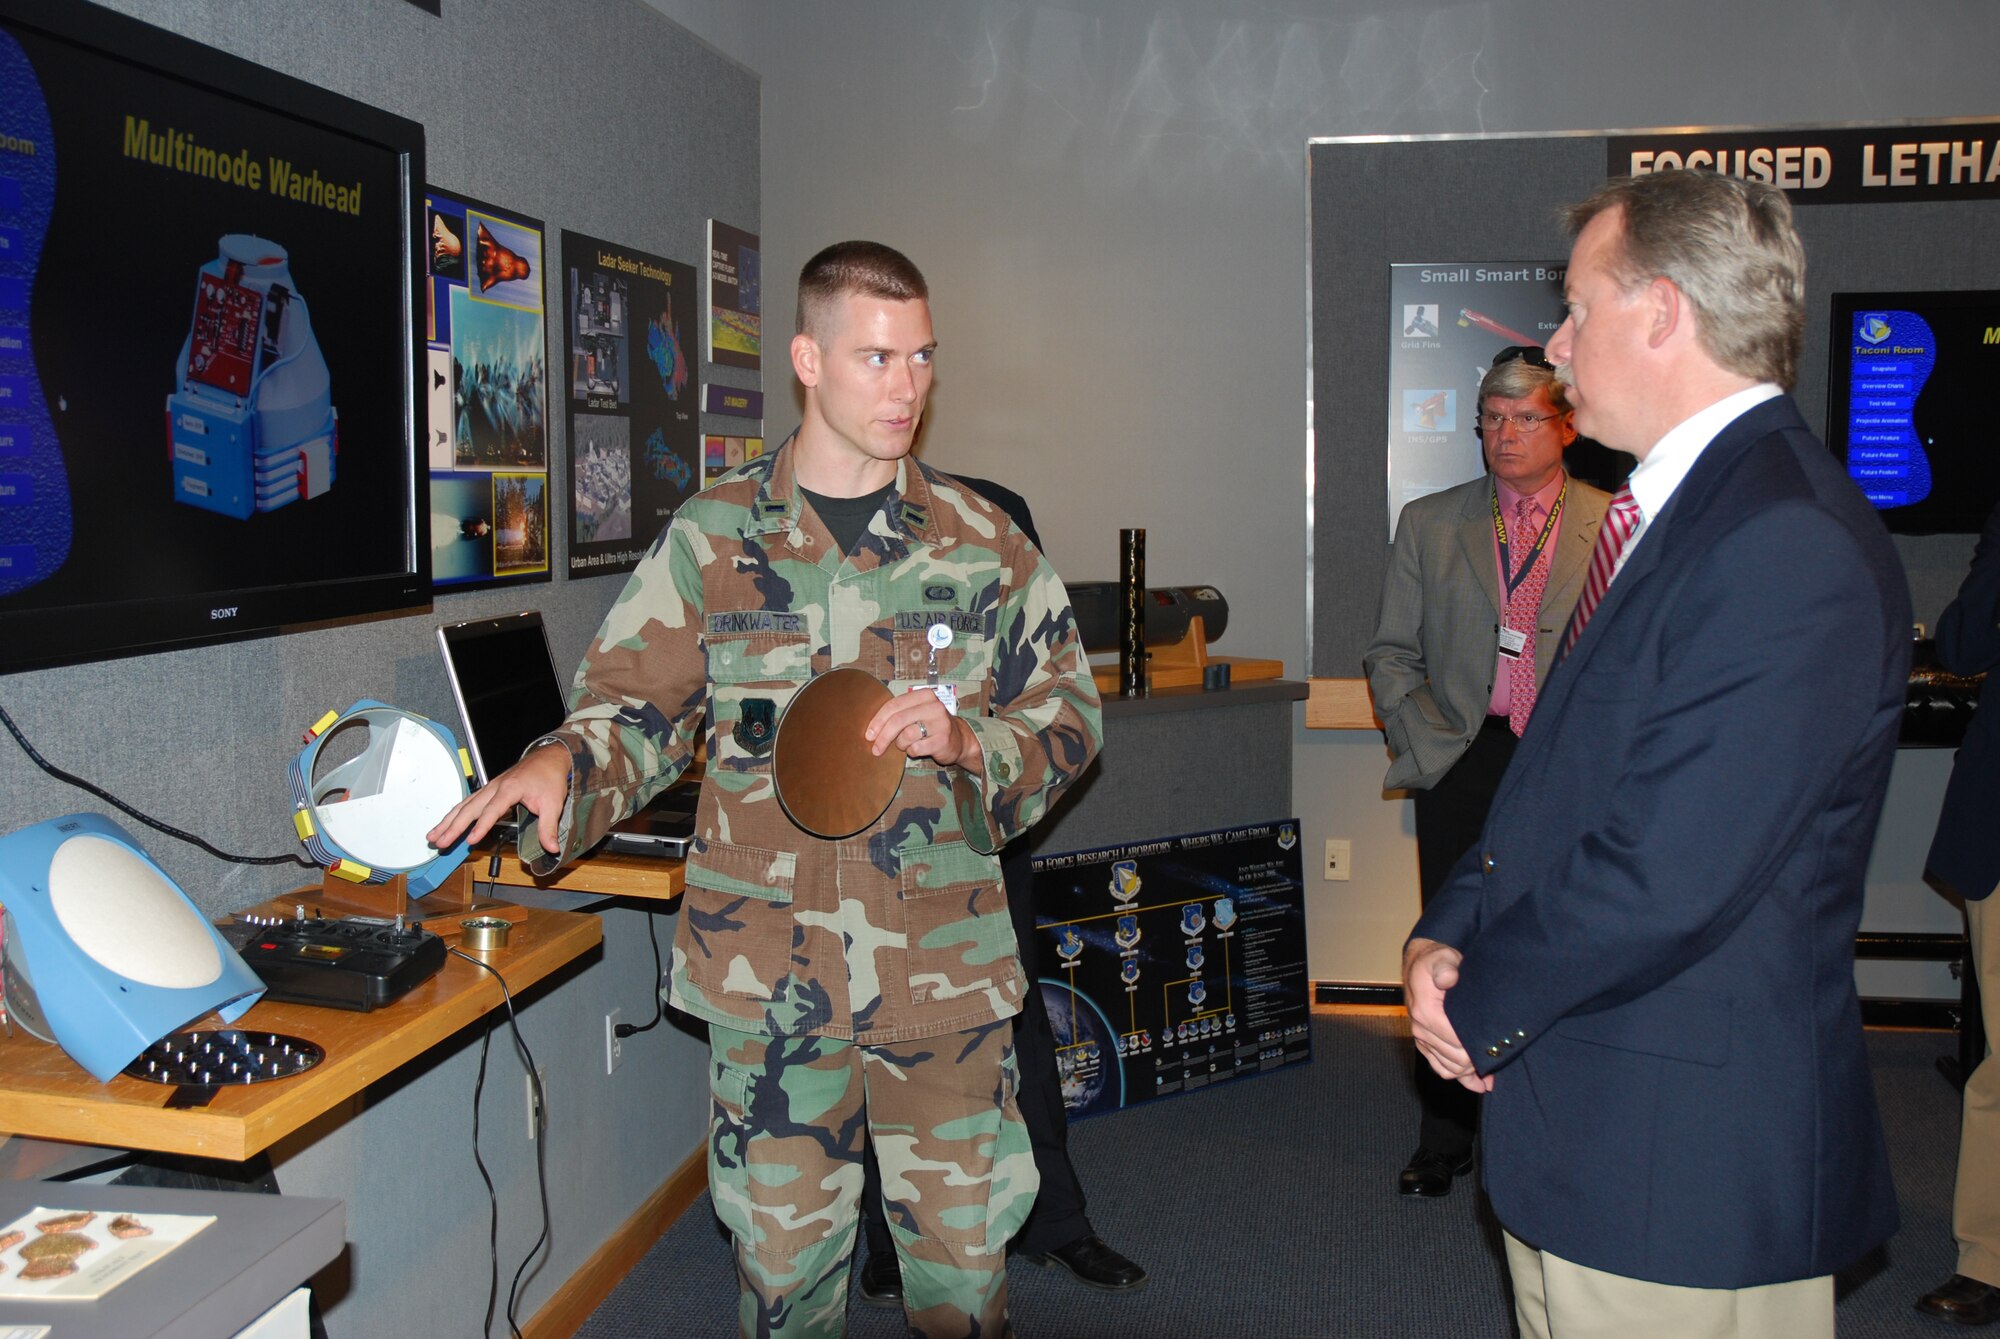 EGLIN AIR FORCE BASE, Fla. -- First Lieutenant Ryan Drinkwater explains the operation of the Multimode Warhead to Florida Lieutenant Governor Jeff Kottkamp during his visit to the Air Force Research Laboratory Technology Display Center July 18. (Air Force photo by Mike Wallace).

 
